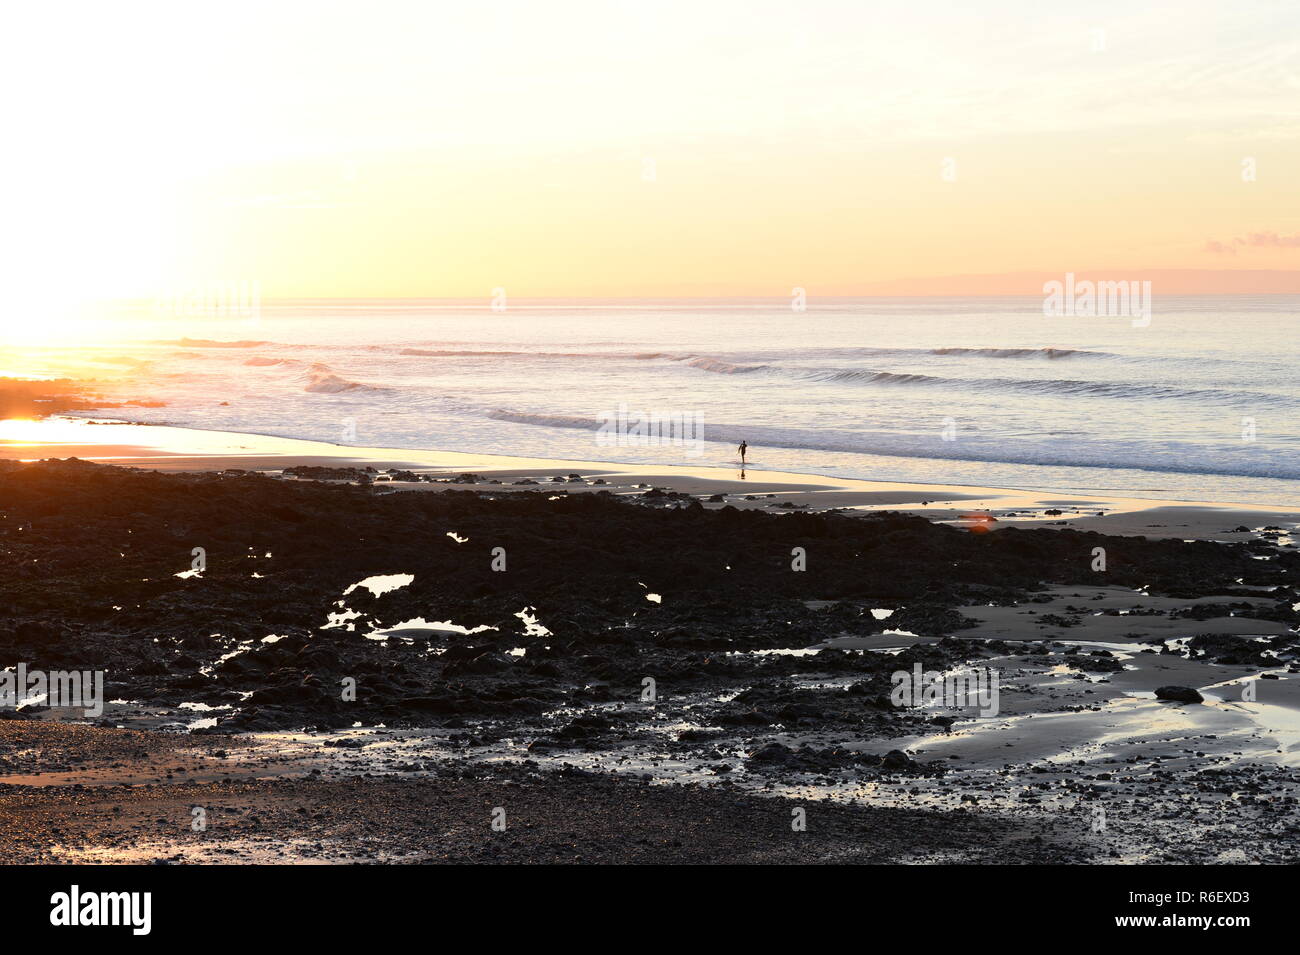 Lone surfer on rocky shore at dawn Stock Photo